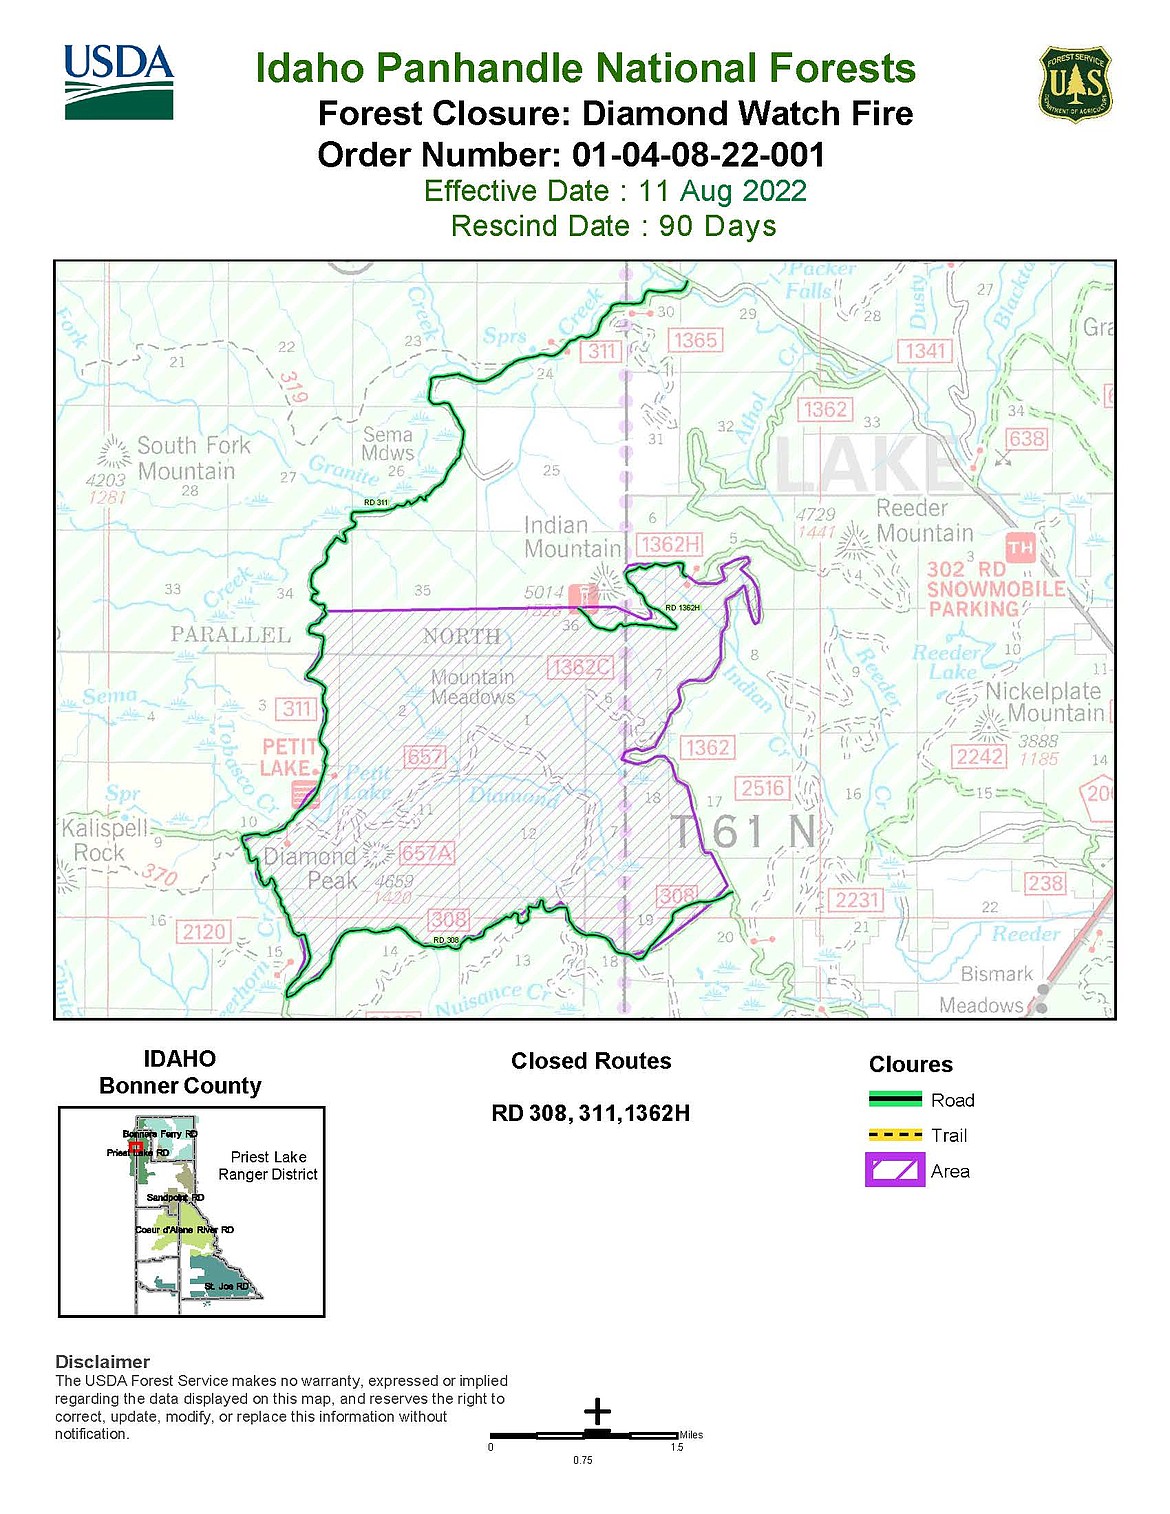 A map shows the roads and area near the Diamond Watch Fire that have been closed to allow crews to fight the fire safely.